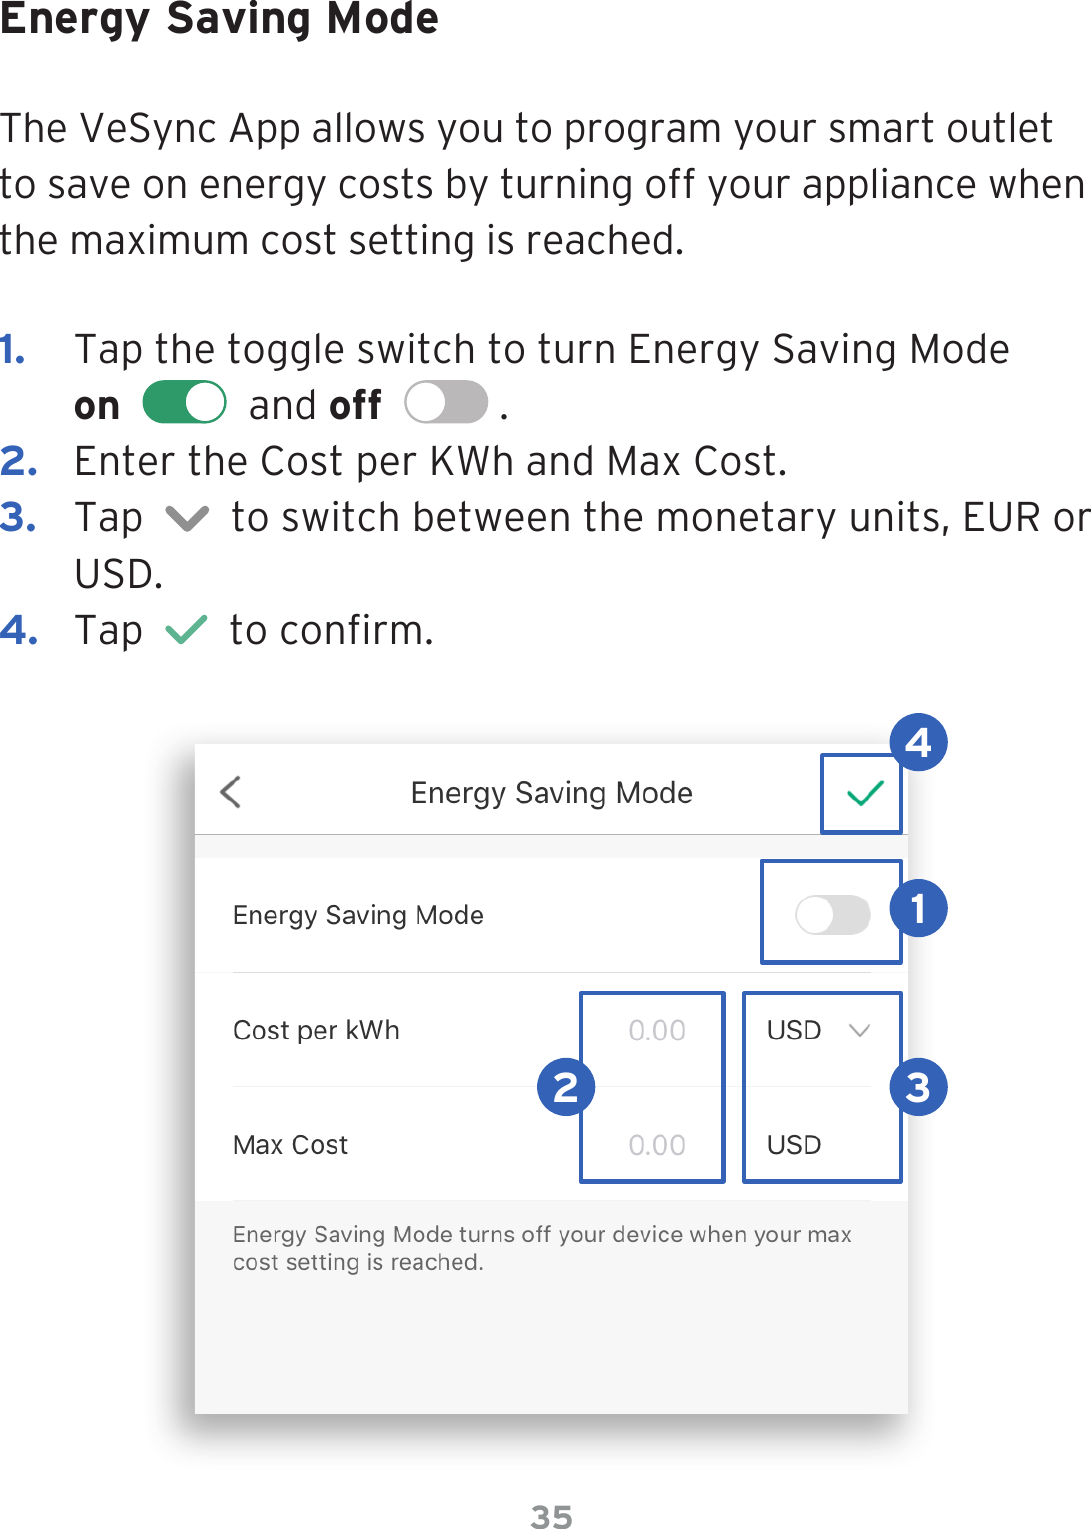 35Energy Saving ModeThe VeSync App allows you to program your smart outlet to save on energy costs by turning off your appliance when the maximum cost setting is reached. 1.  Tap the toggle switch to turn Energy Saving Mode  on     and off    . 2.  Enter the Cost per KWh and Max Cost.3.  Tap     to switch between the monetary units, EUR or USD.4.  Tap     to conrm.12 34